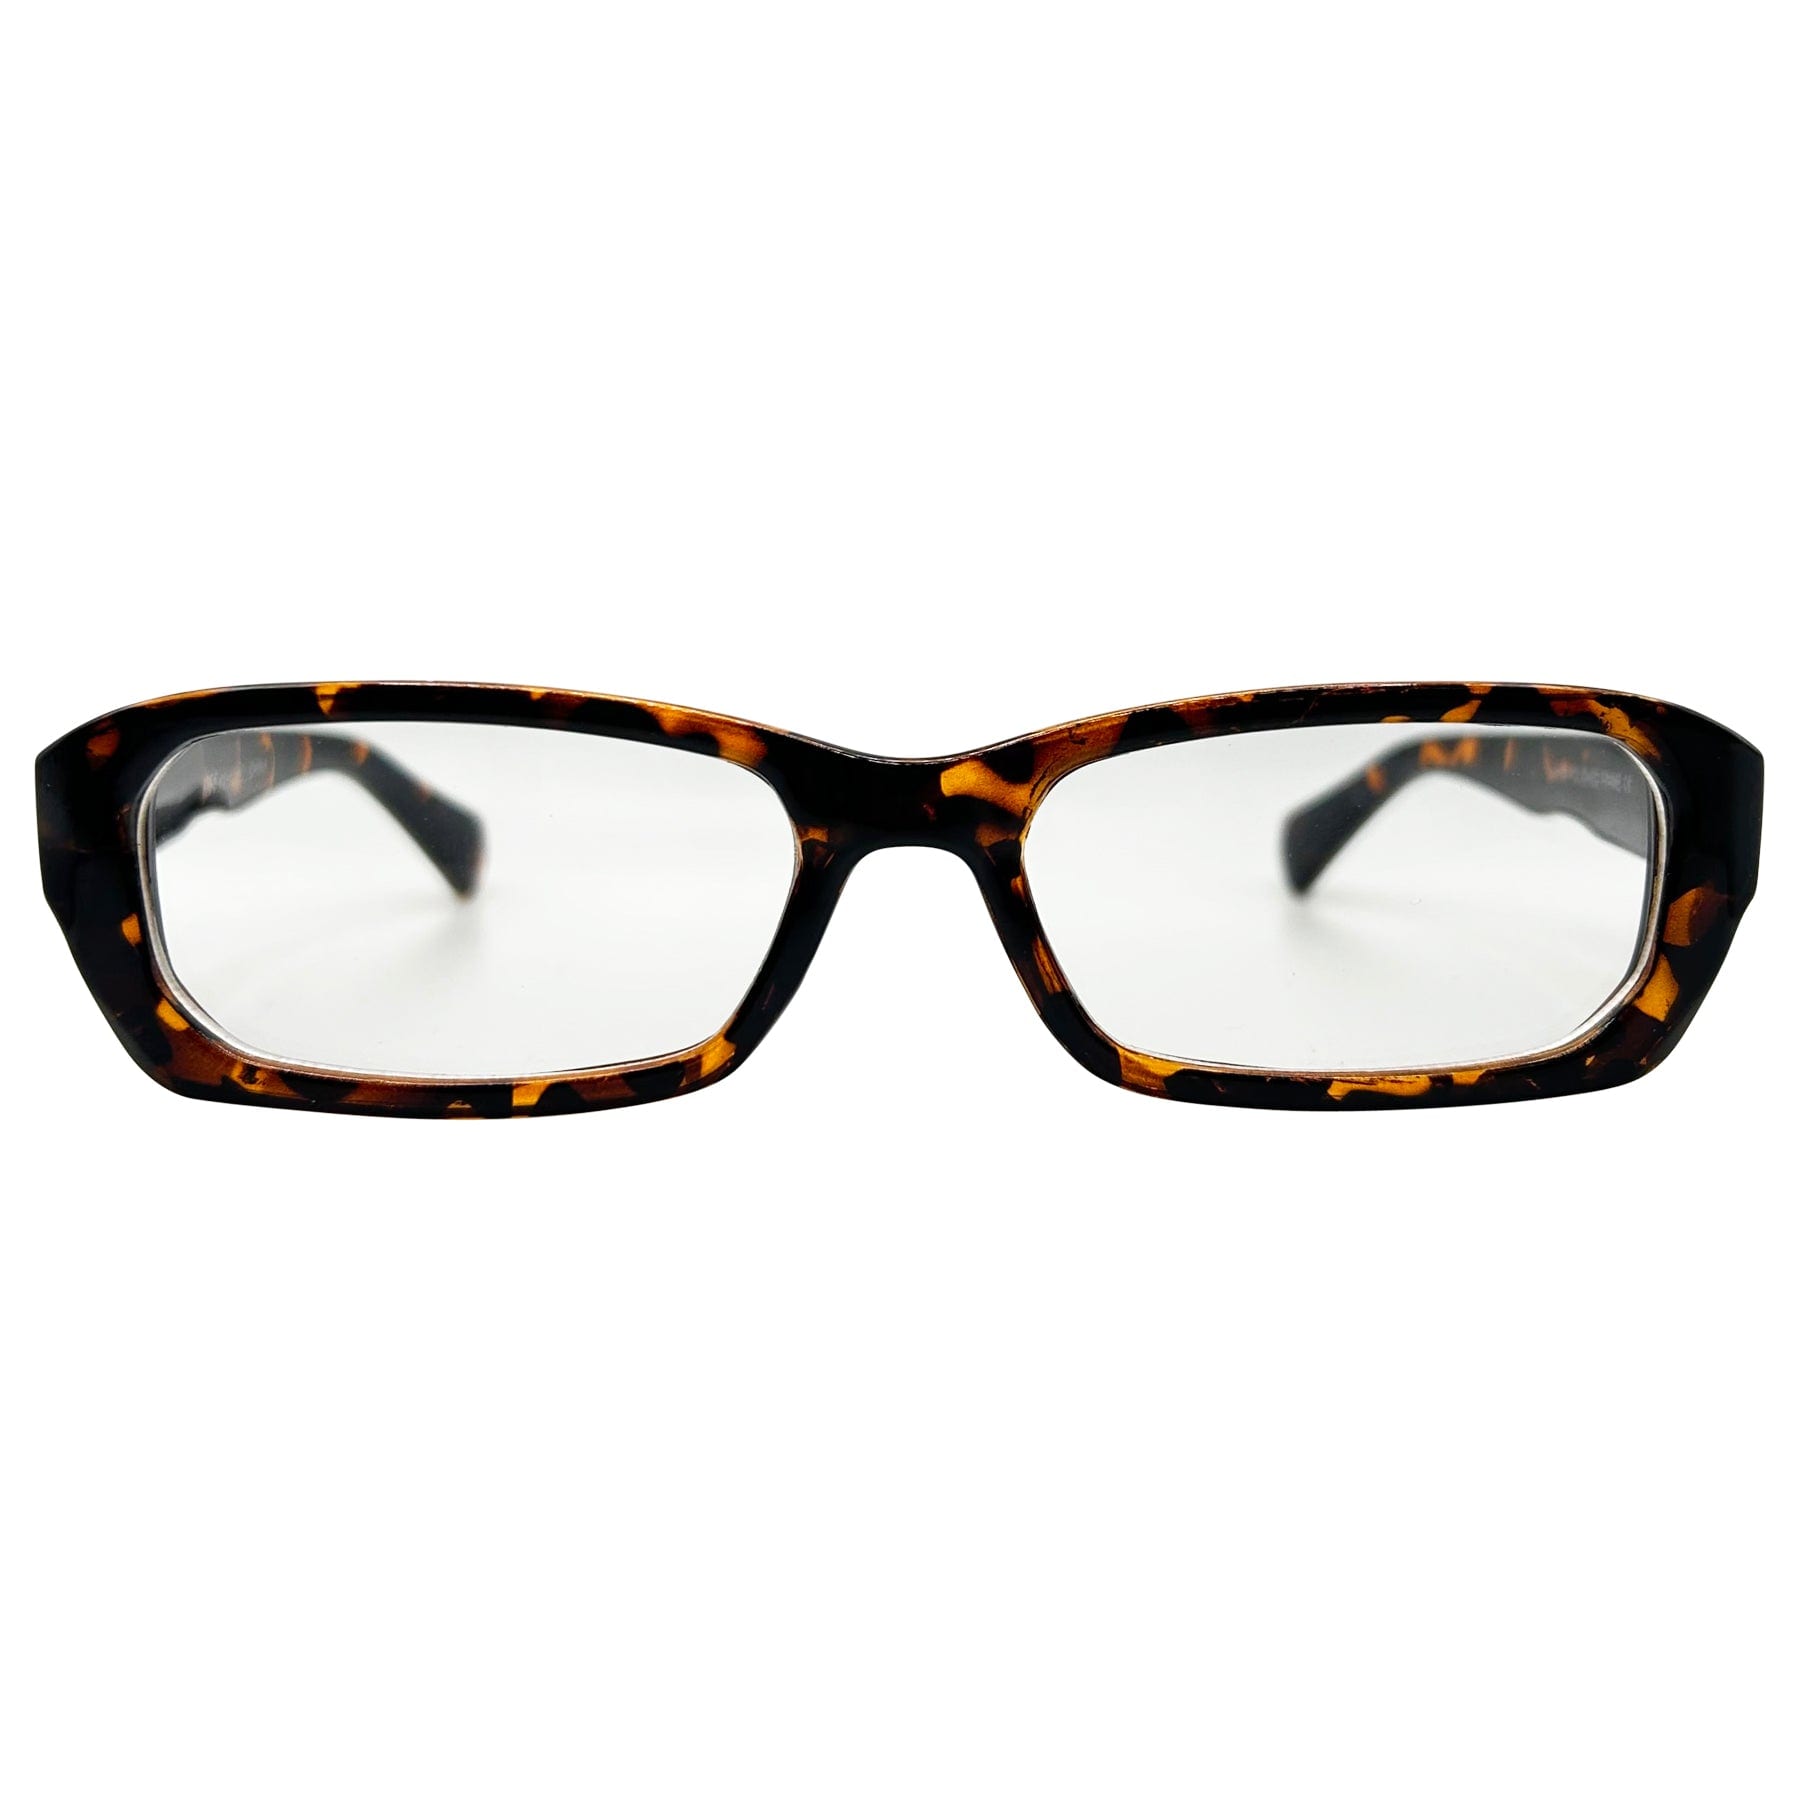 square shape tortoise sunglasses with a clear lens 